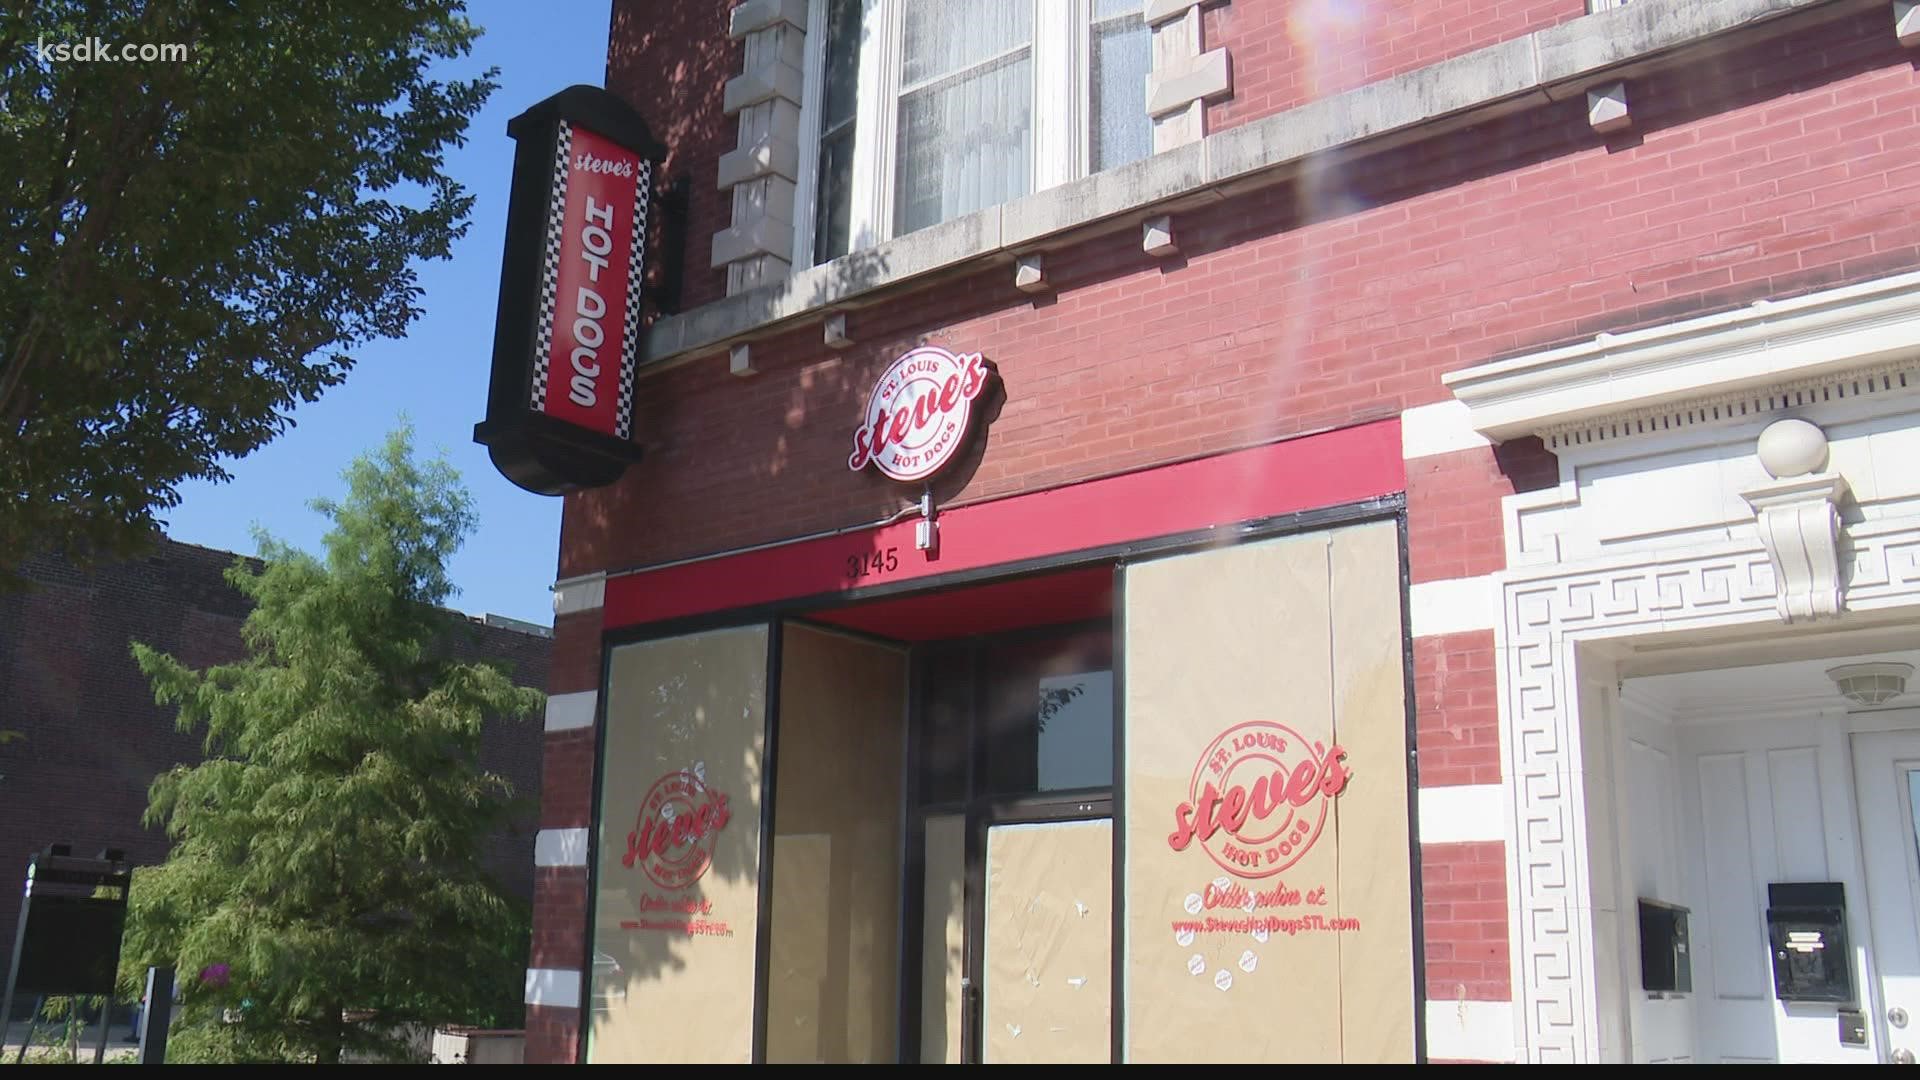 After paying it forward during the pandemic, Steve's Hot Dogs is looking forward to opening up a new location.